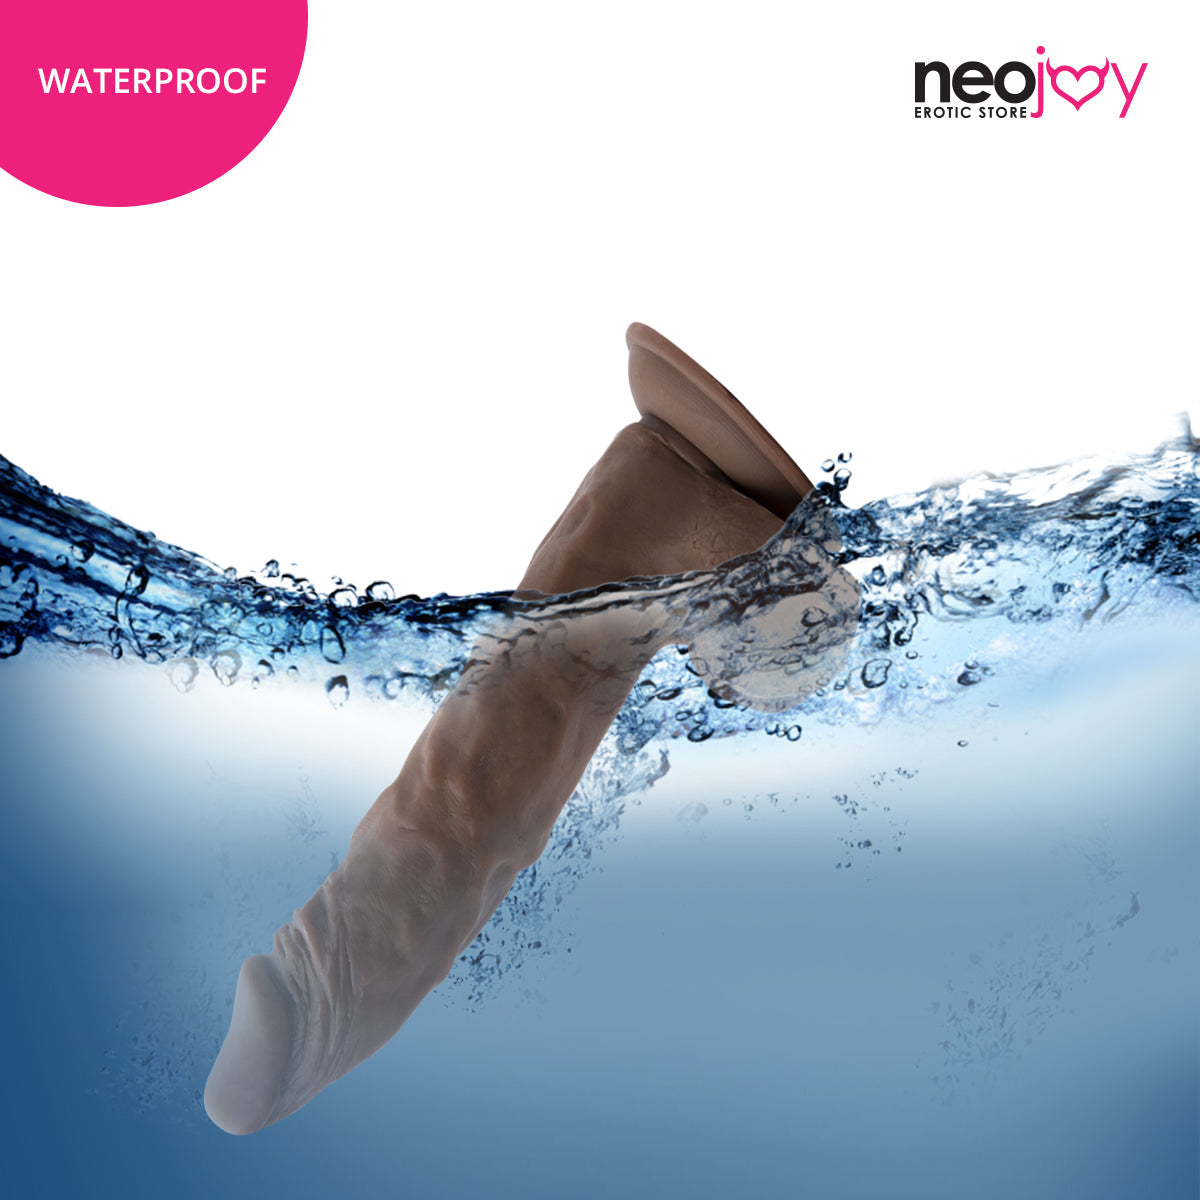 Neojoy - Ultra Realistic Dildo With Strap-On Dong Harness - Brown - 24.5cm - 9.6 inch